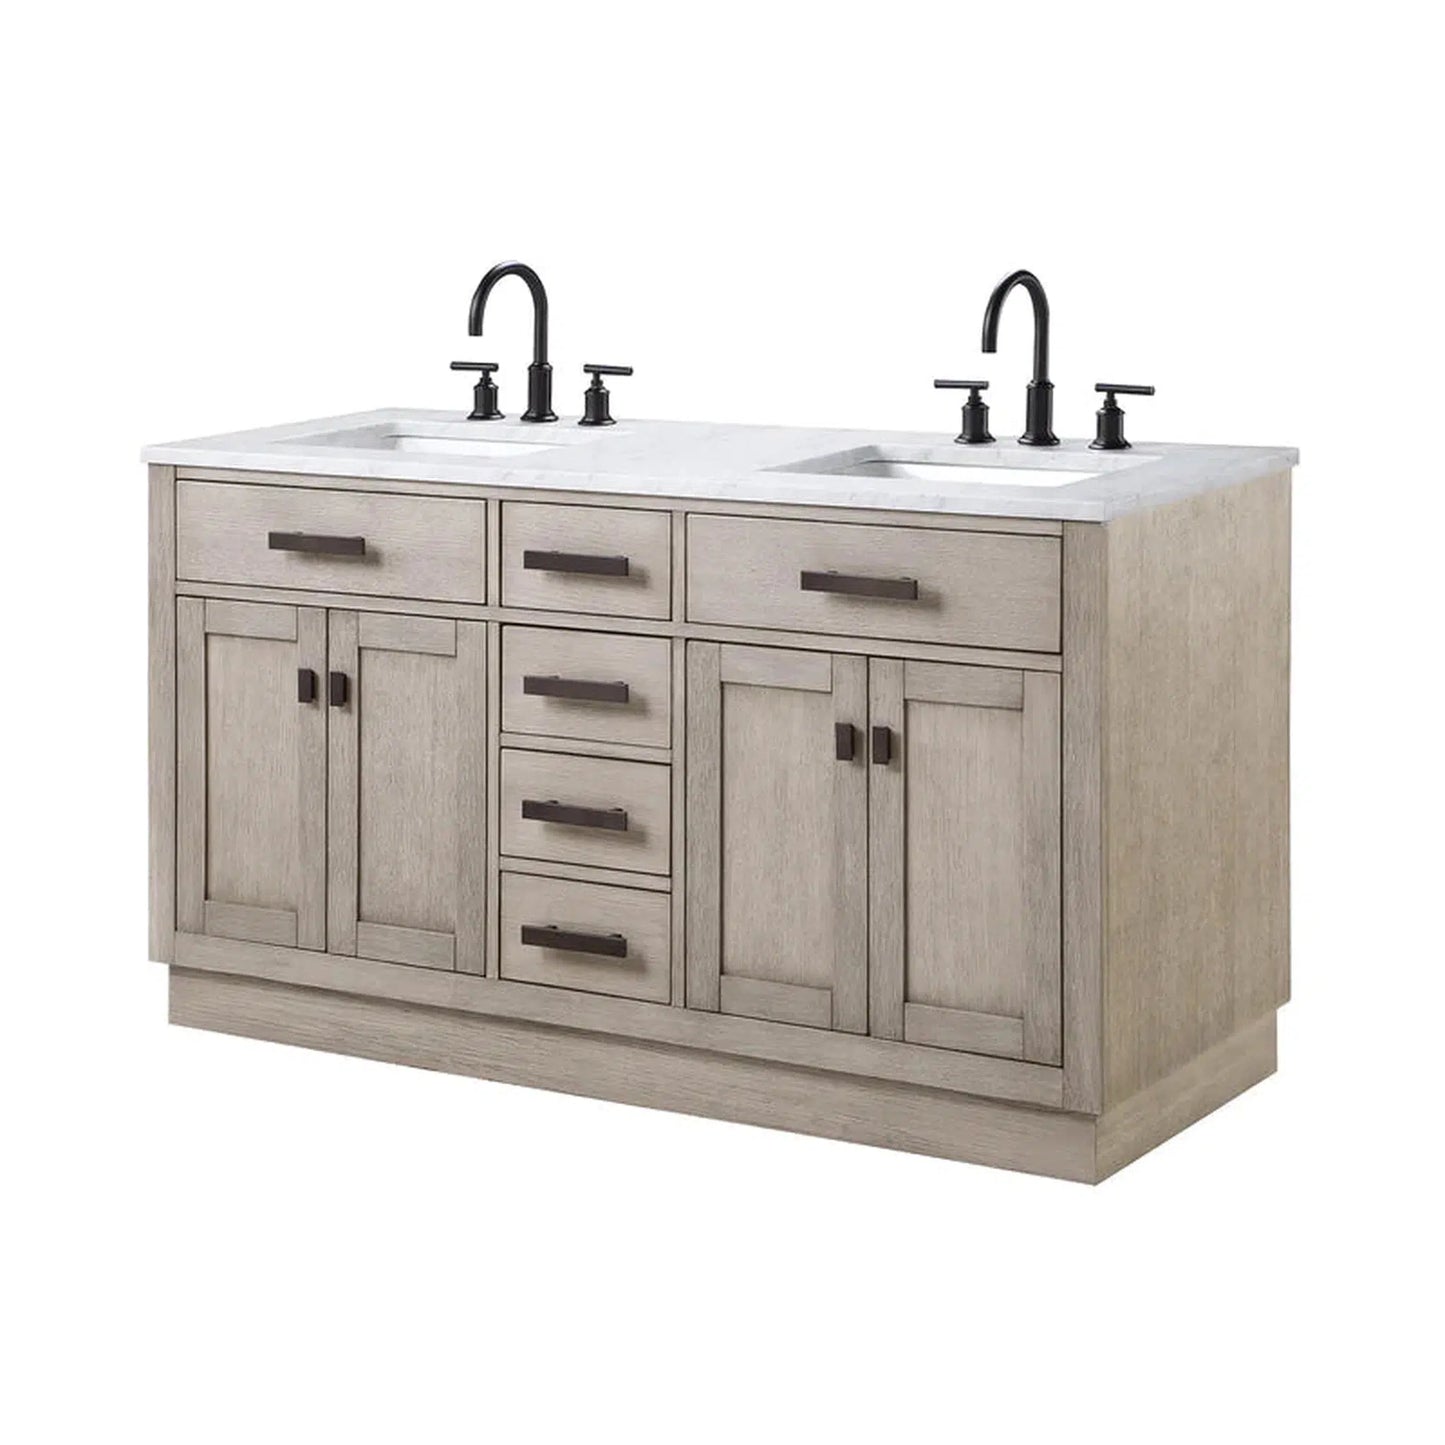 Water Creation Chestnut 60" Double Sink Carrara White Marble Countertop Vanity In Grey Oak with Mirrors